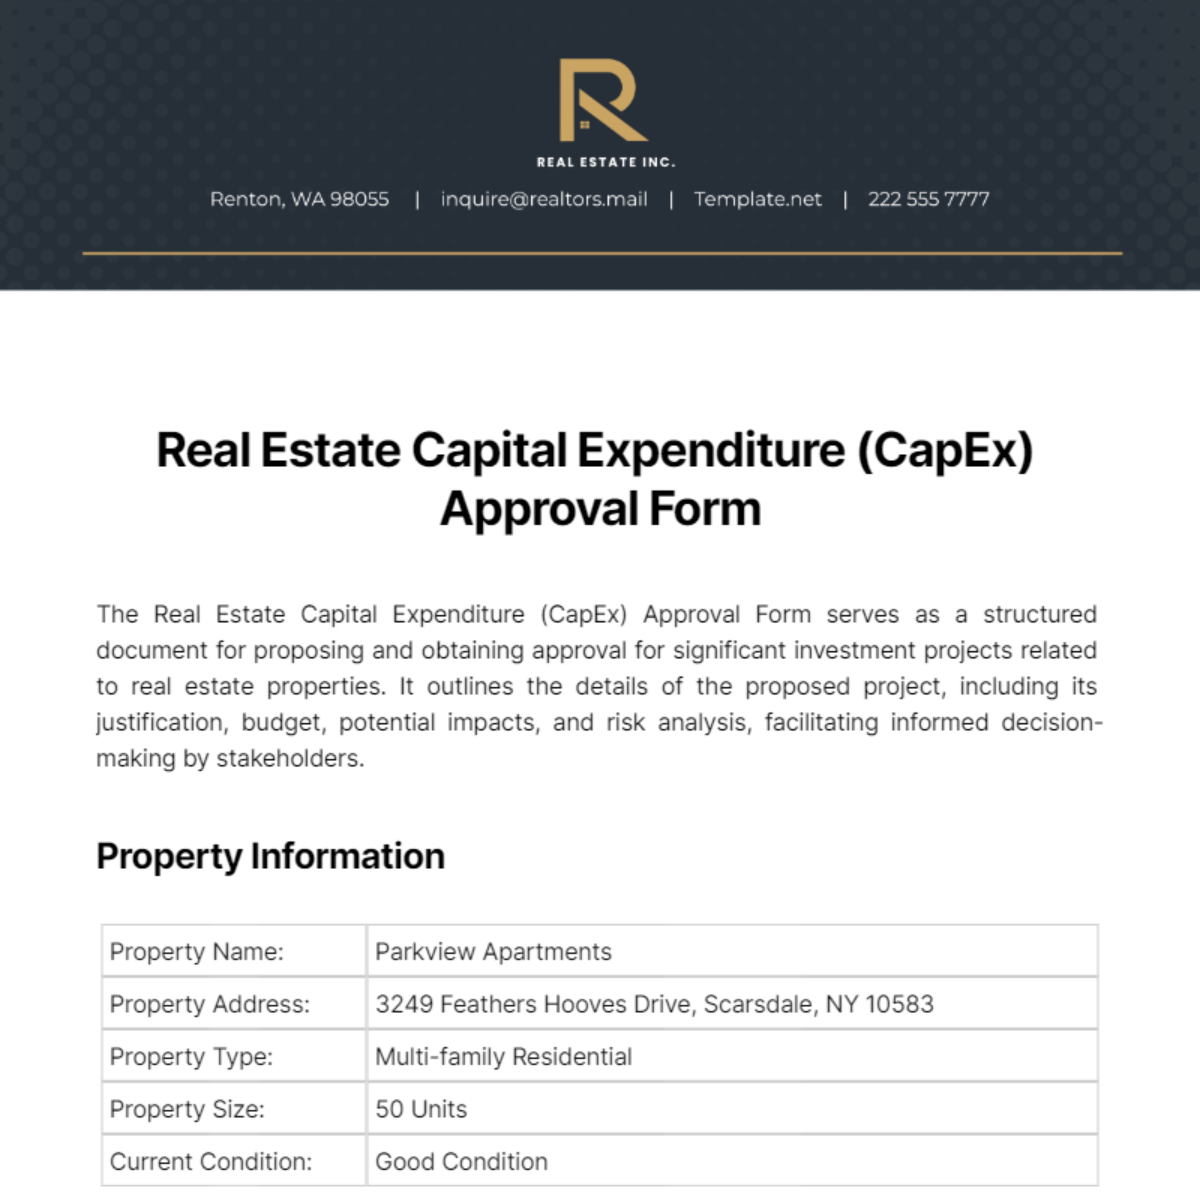 Real Estate Capital Expenditure (CapEx) Approval Form Template